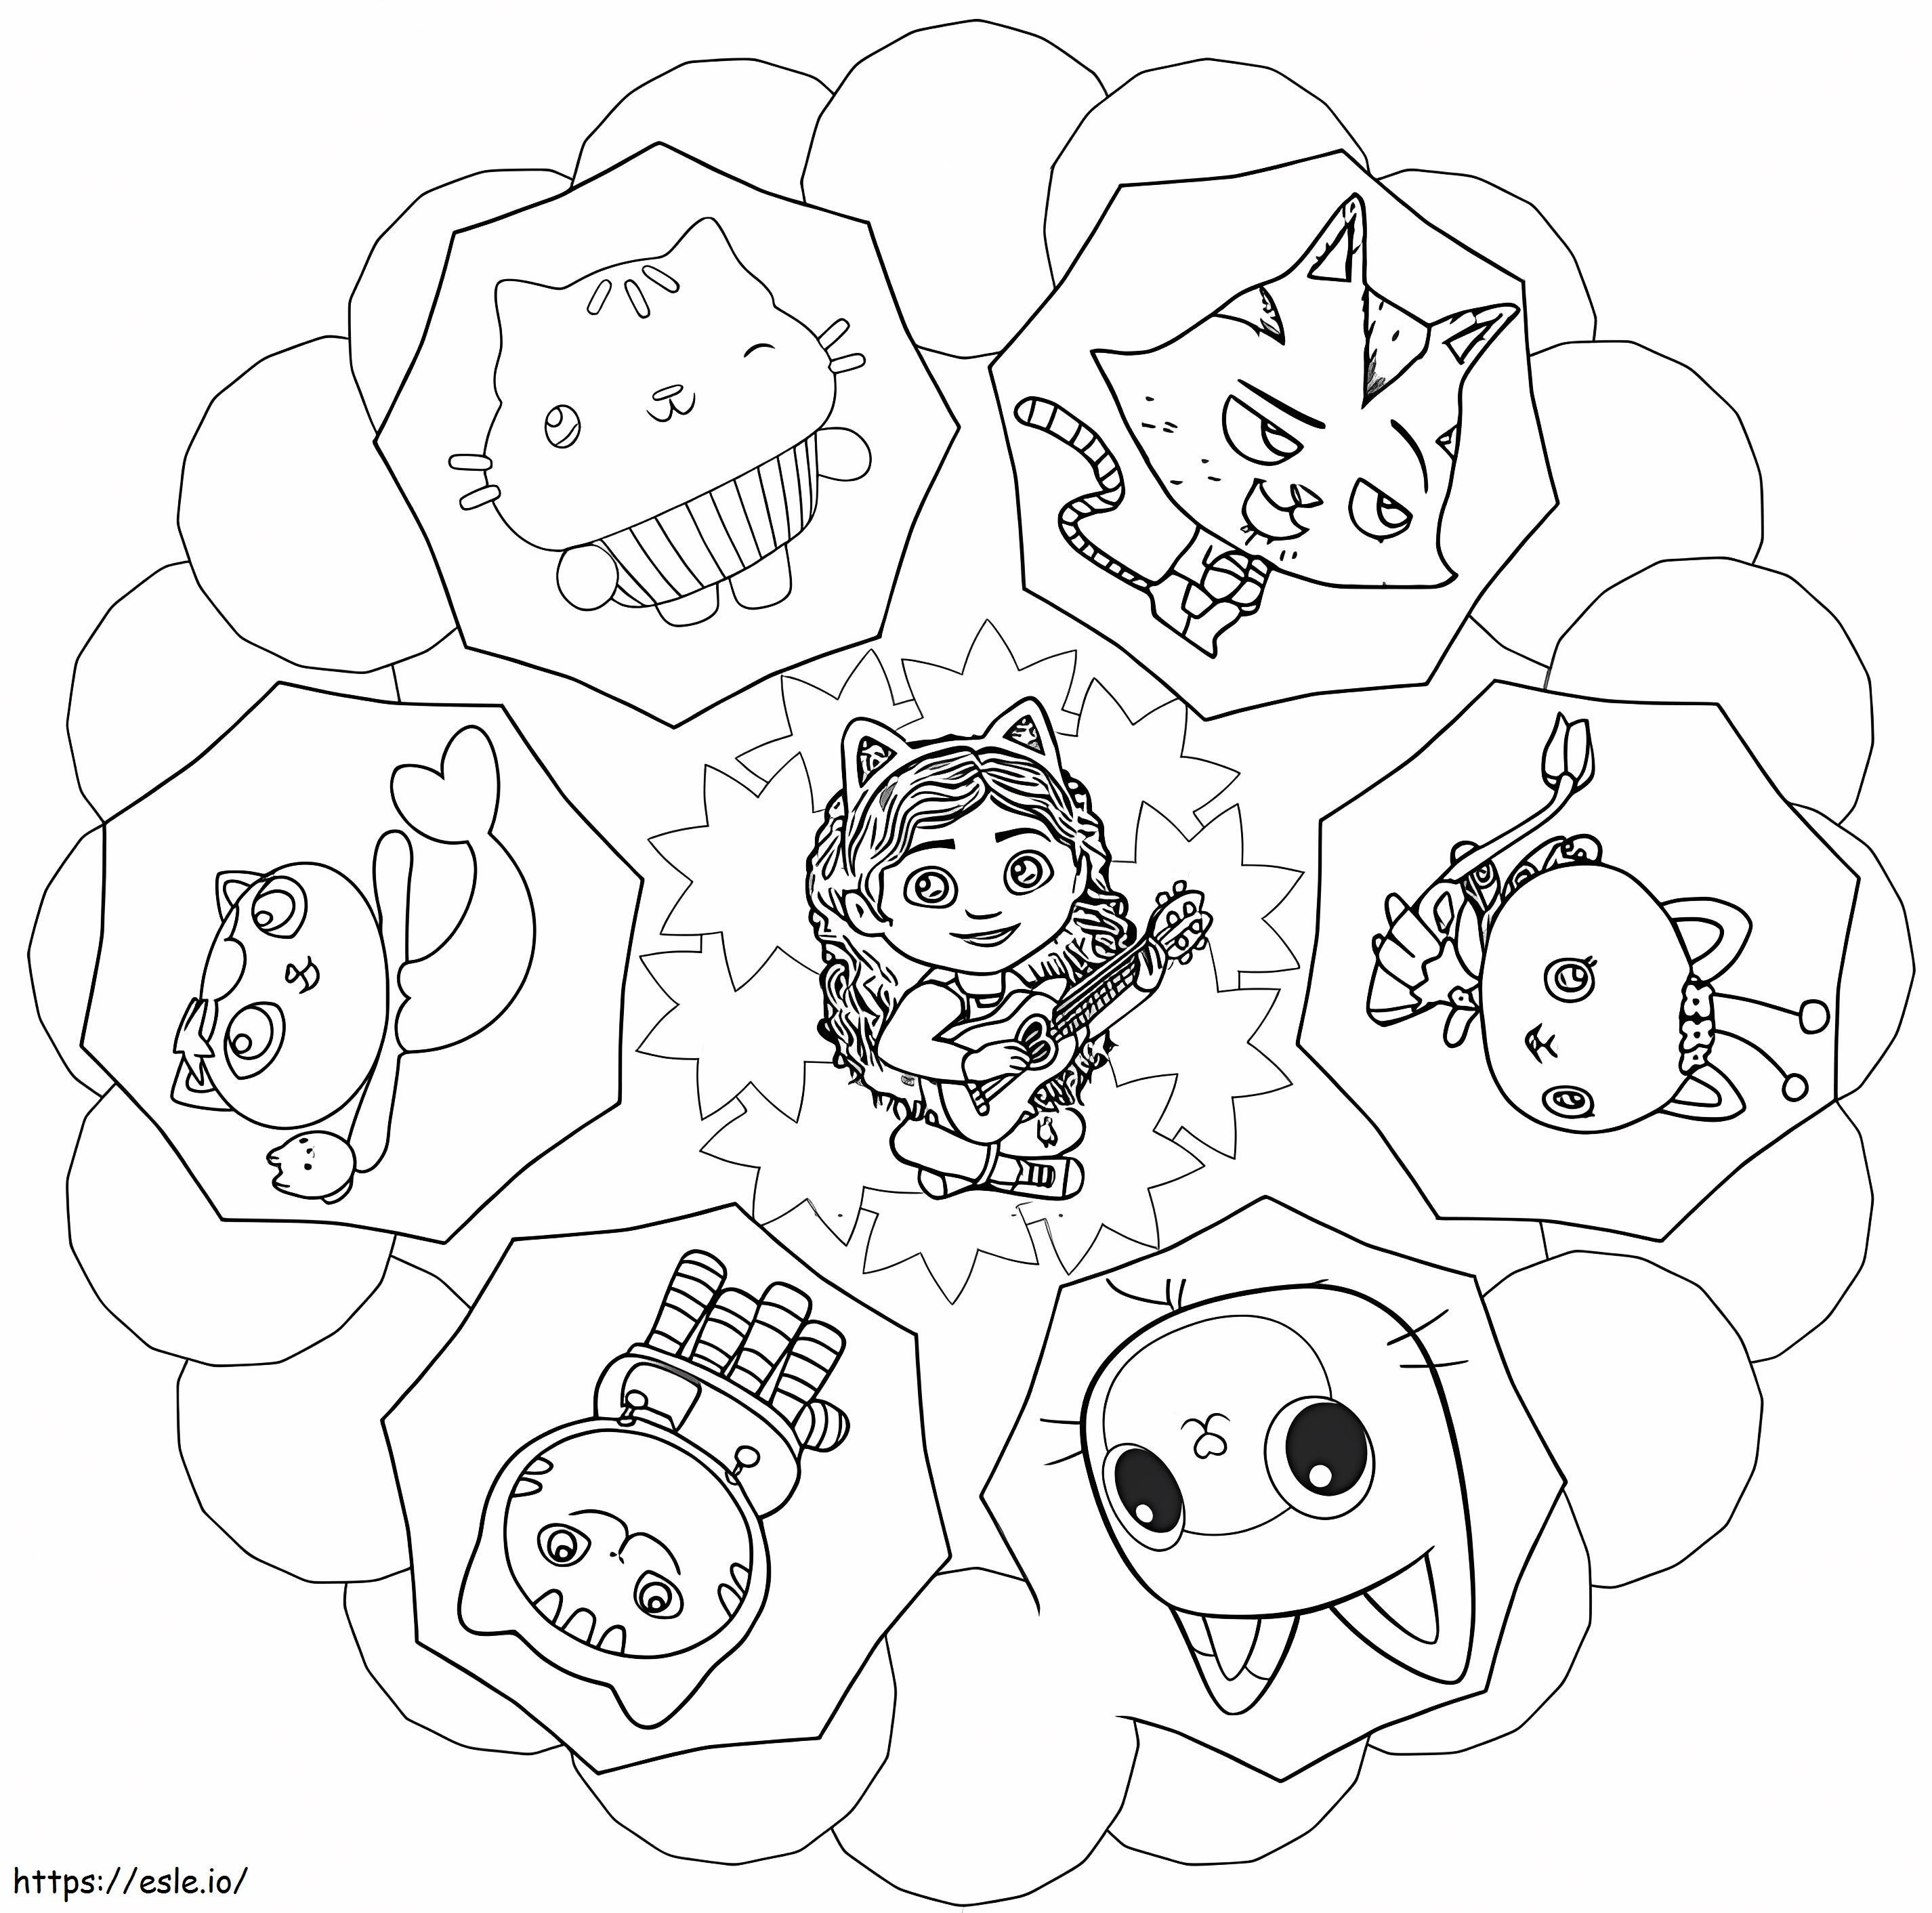 Gabby With Friends coloring page